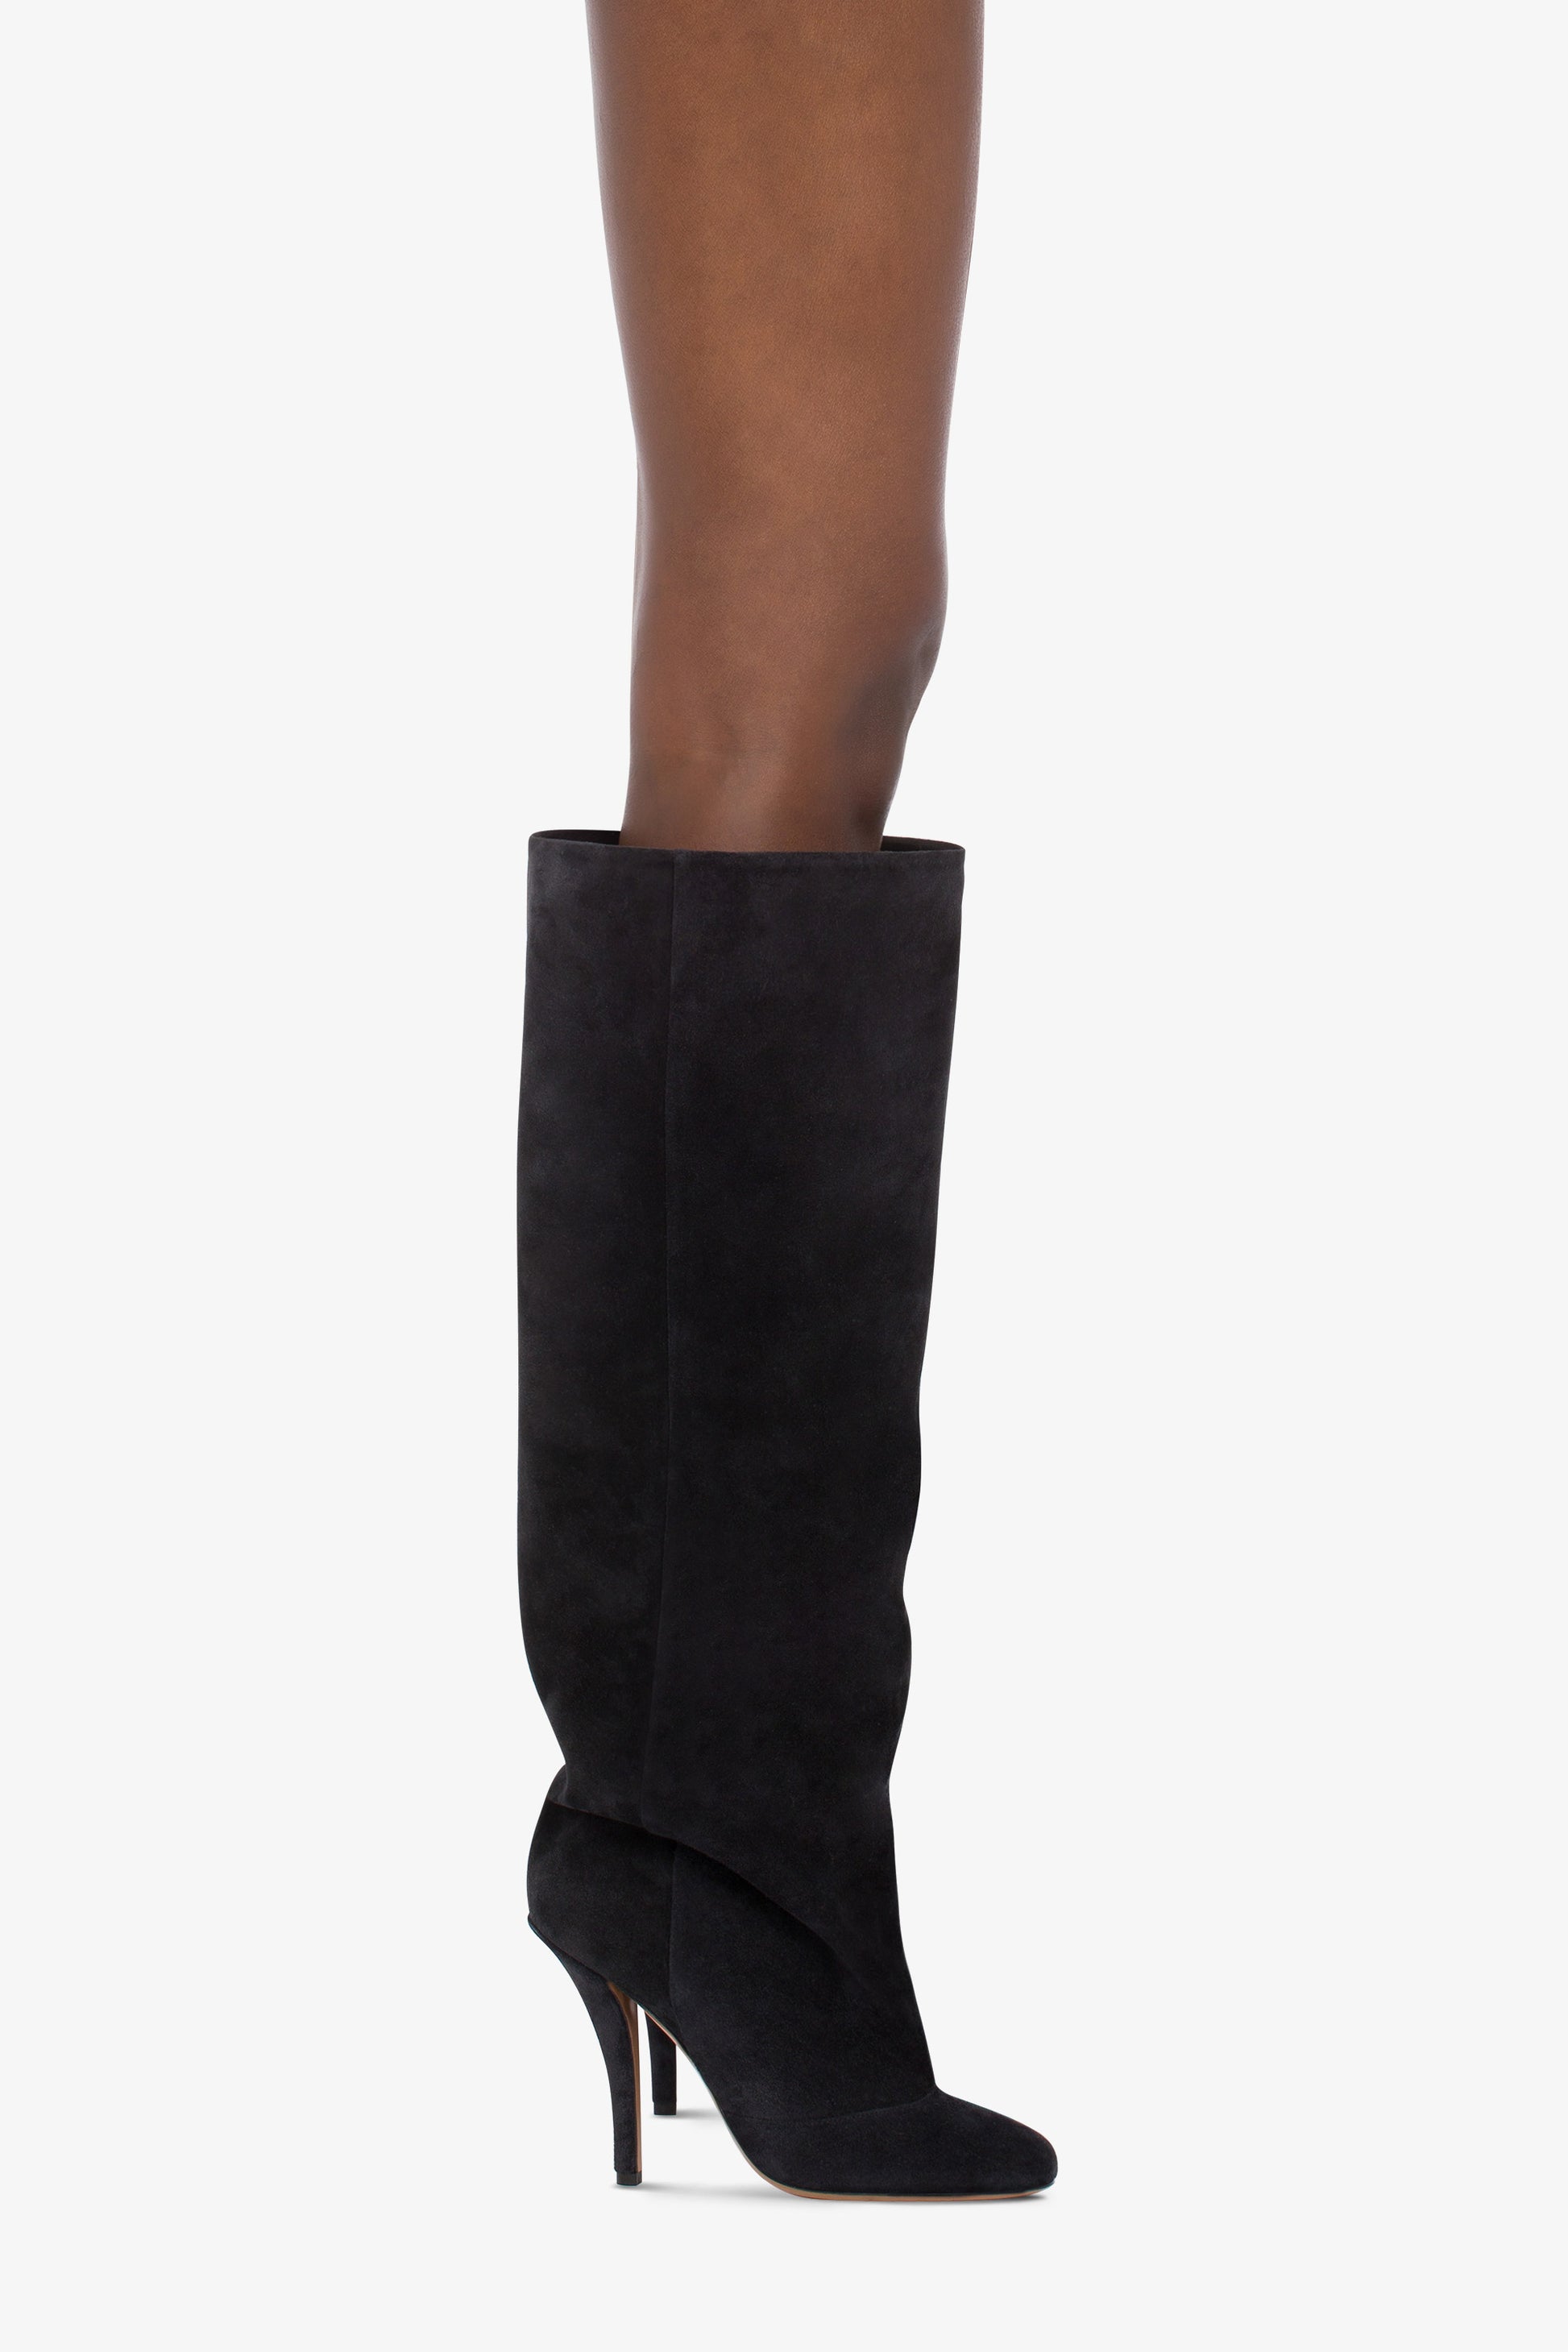 Knee-high boots in soft off-black suede leather - Indossato